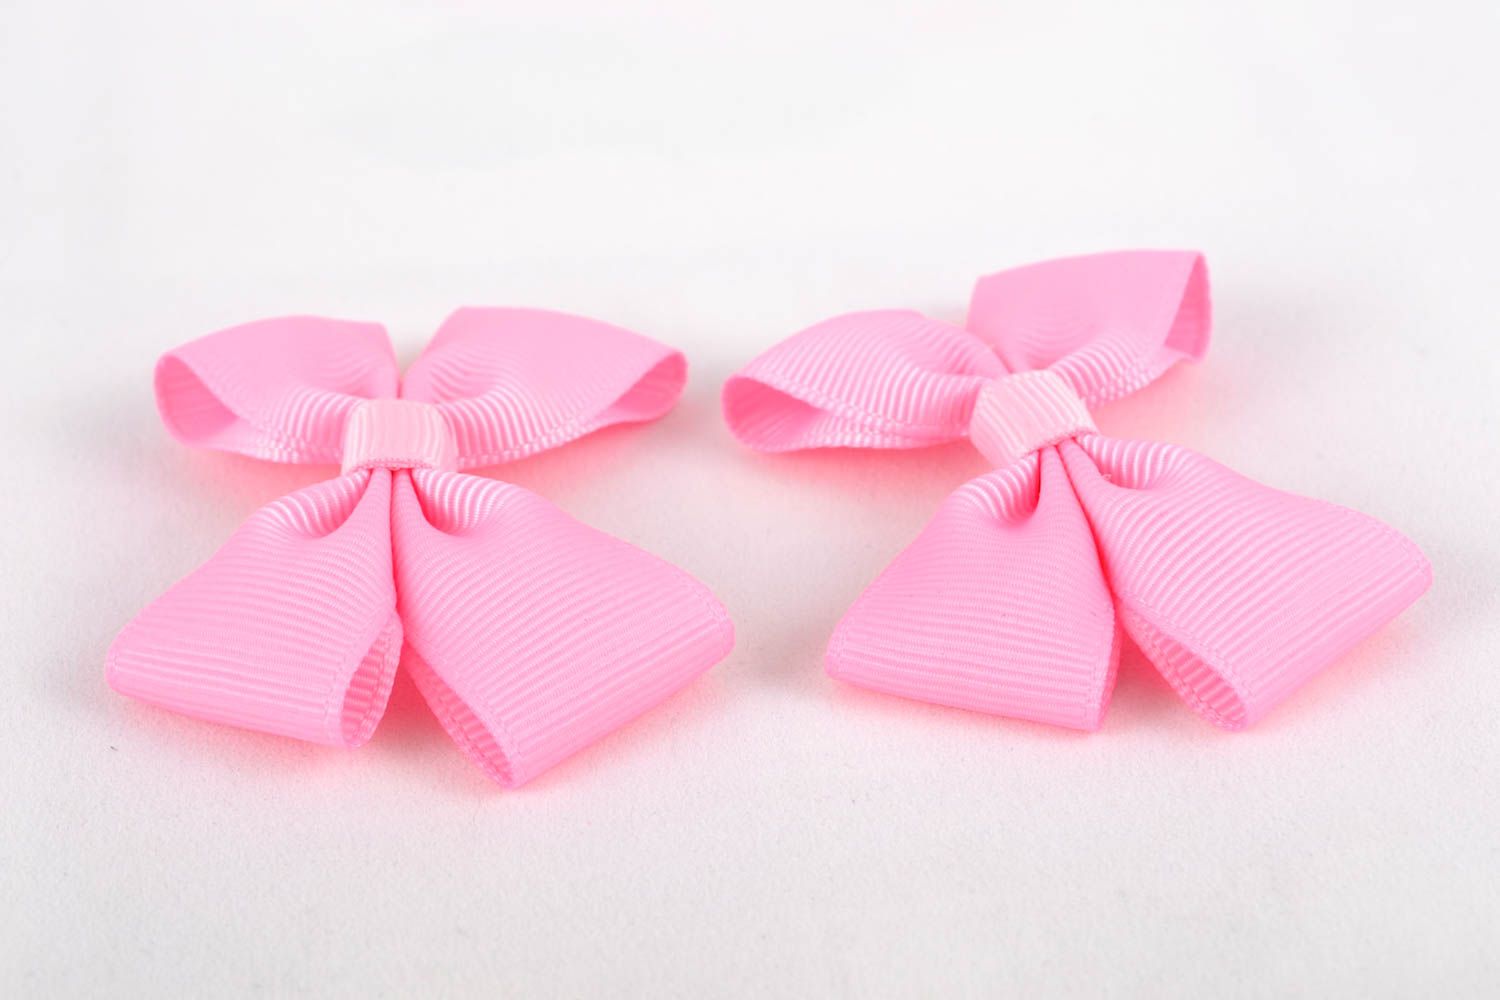 Unusual handmade textile bows hair bow brooch jewelry jewelry making supplies photo 4